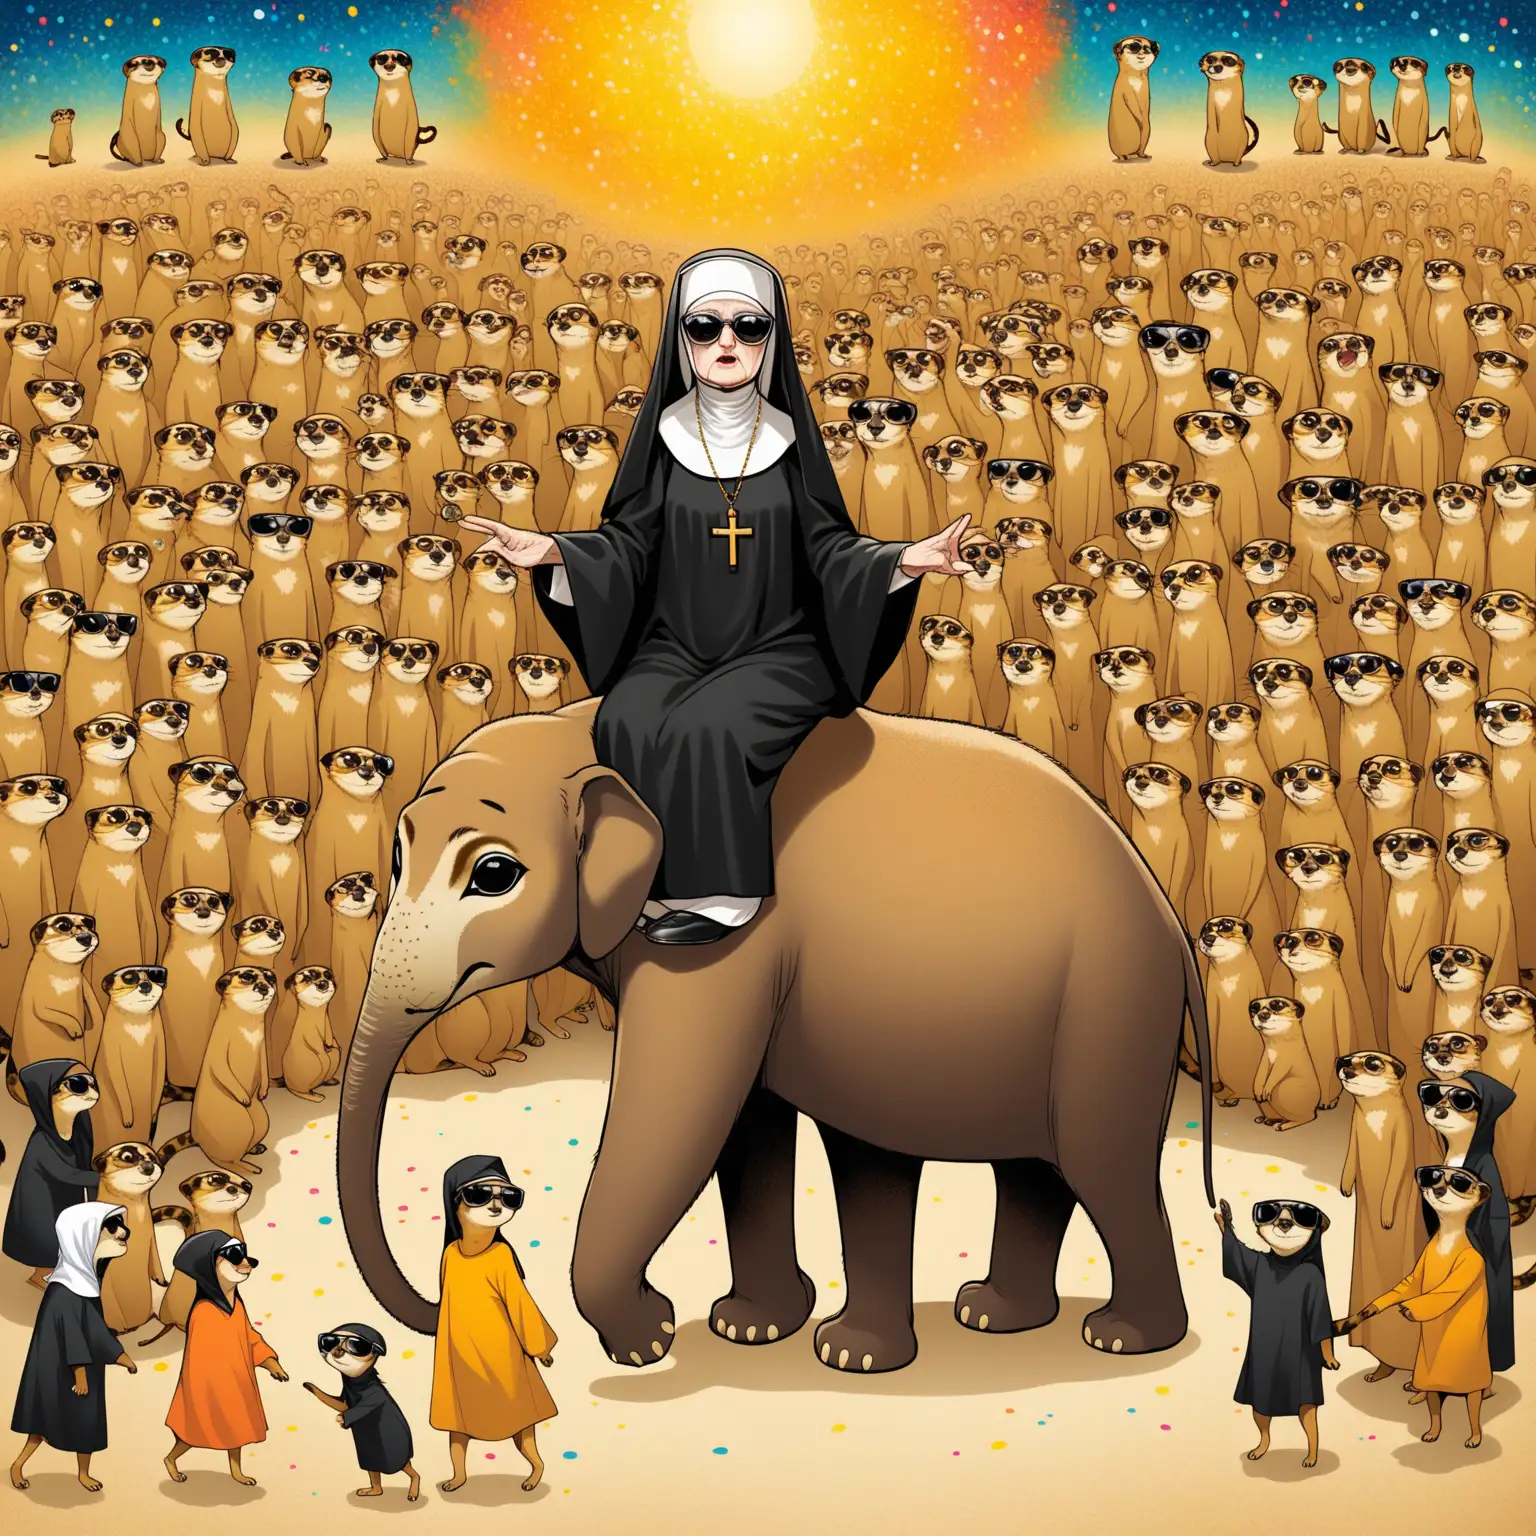 crazy old Nun on an elephant wearing  sunglasses with one large meercat playing tricks STYLE OF KUSTAZ KLIMT AND JACKSON POLLOCK no cross lots  of children lots of children